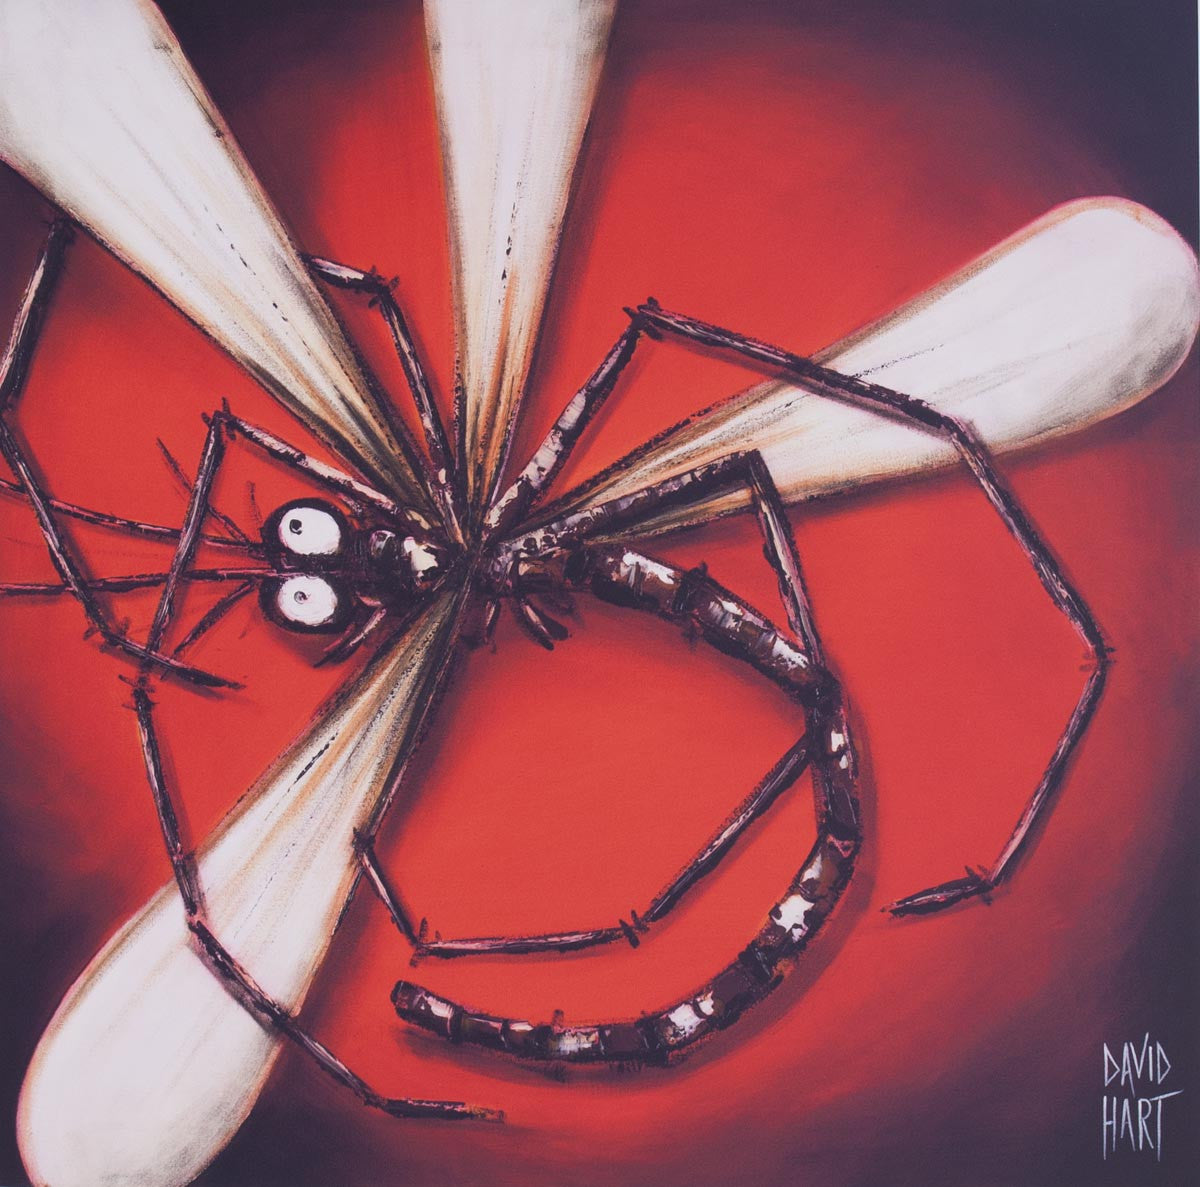 David Hart 'Red Dragonfly' - Giclee print on paper